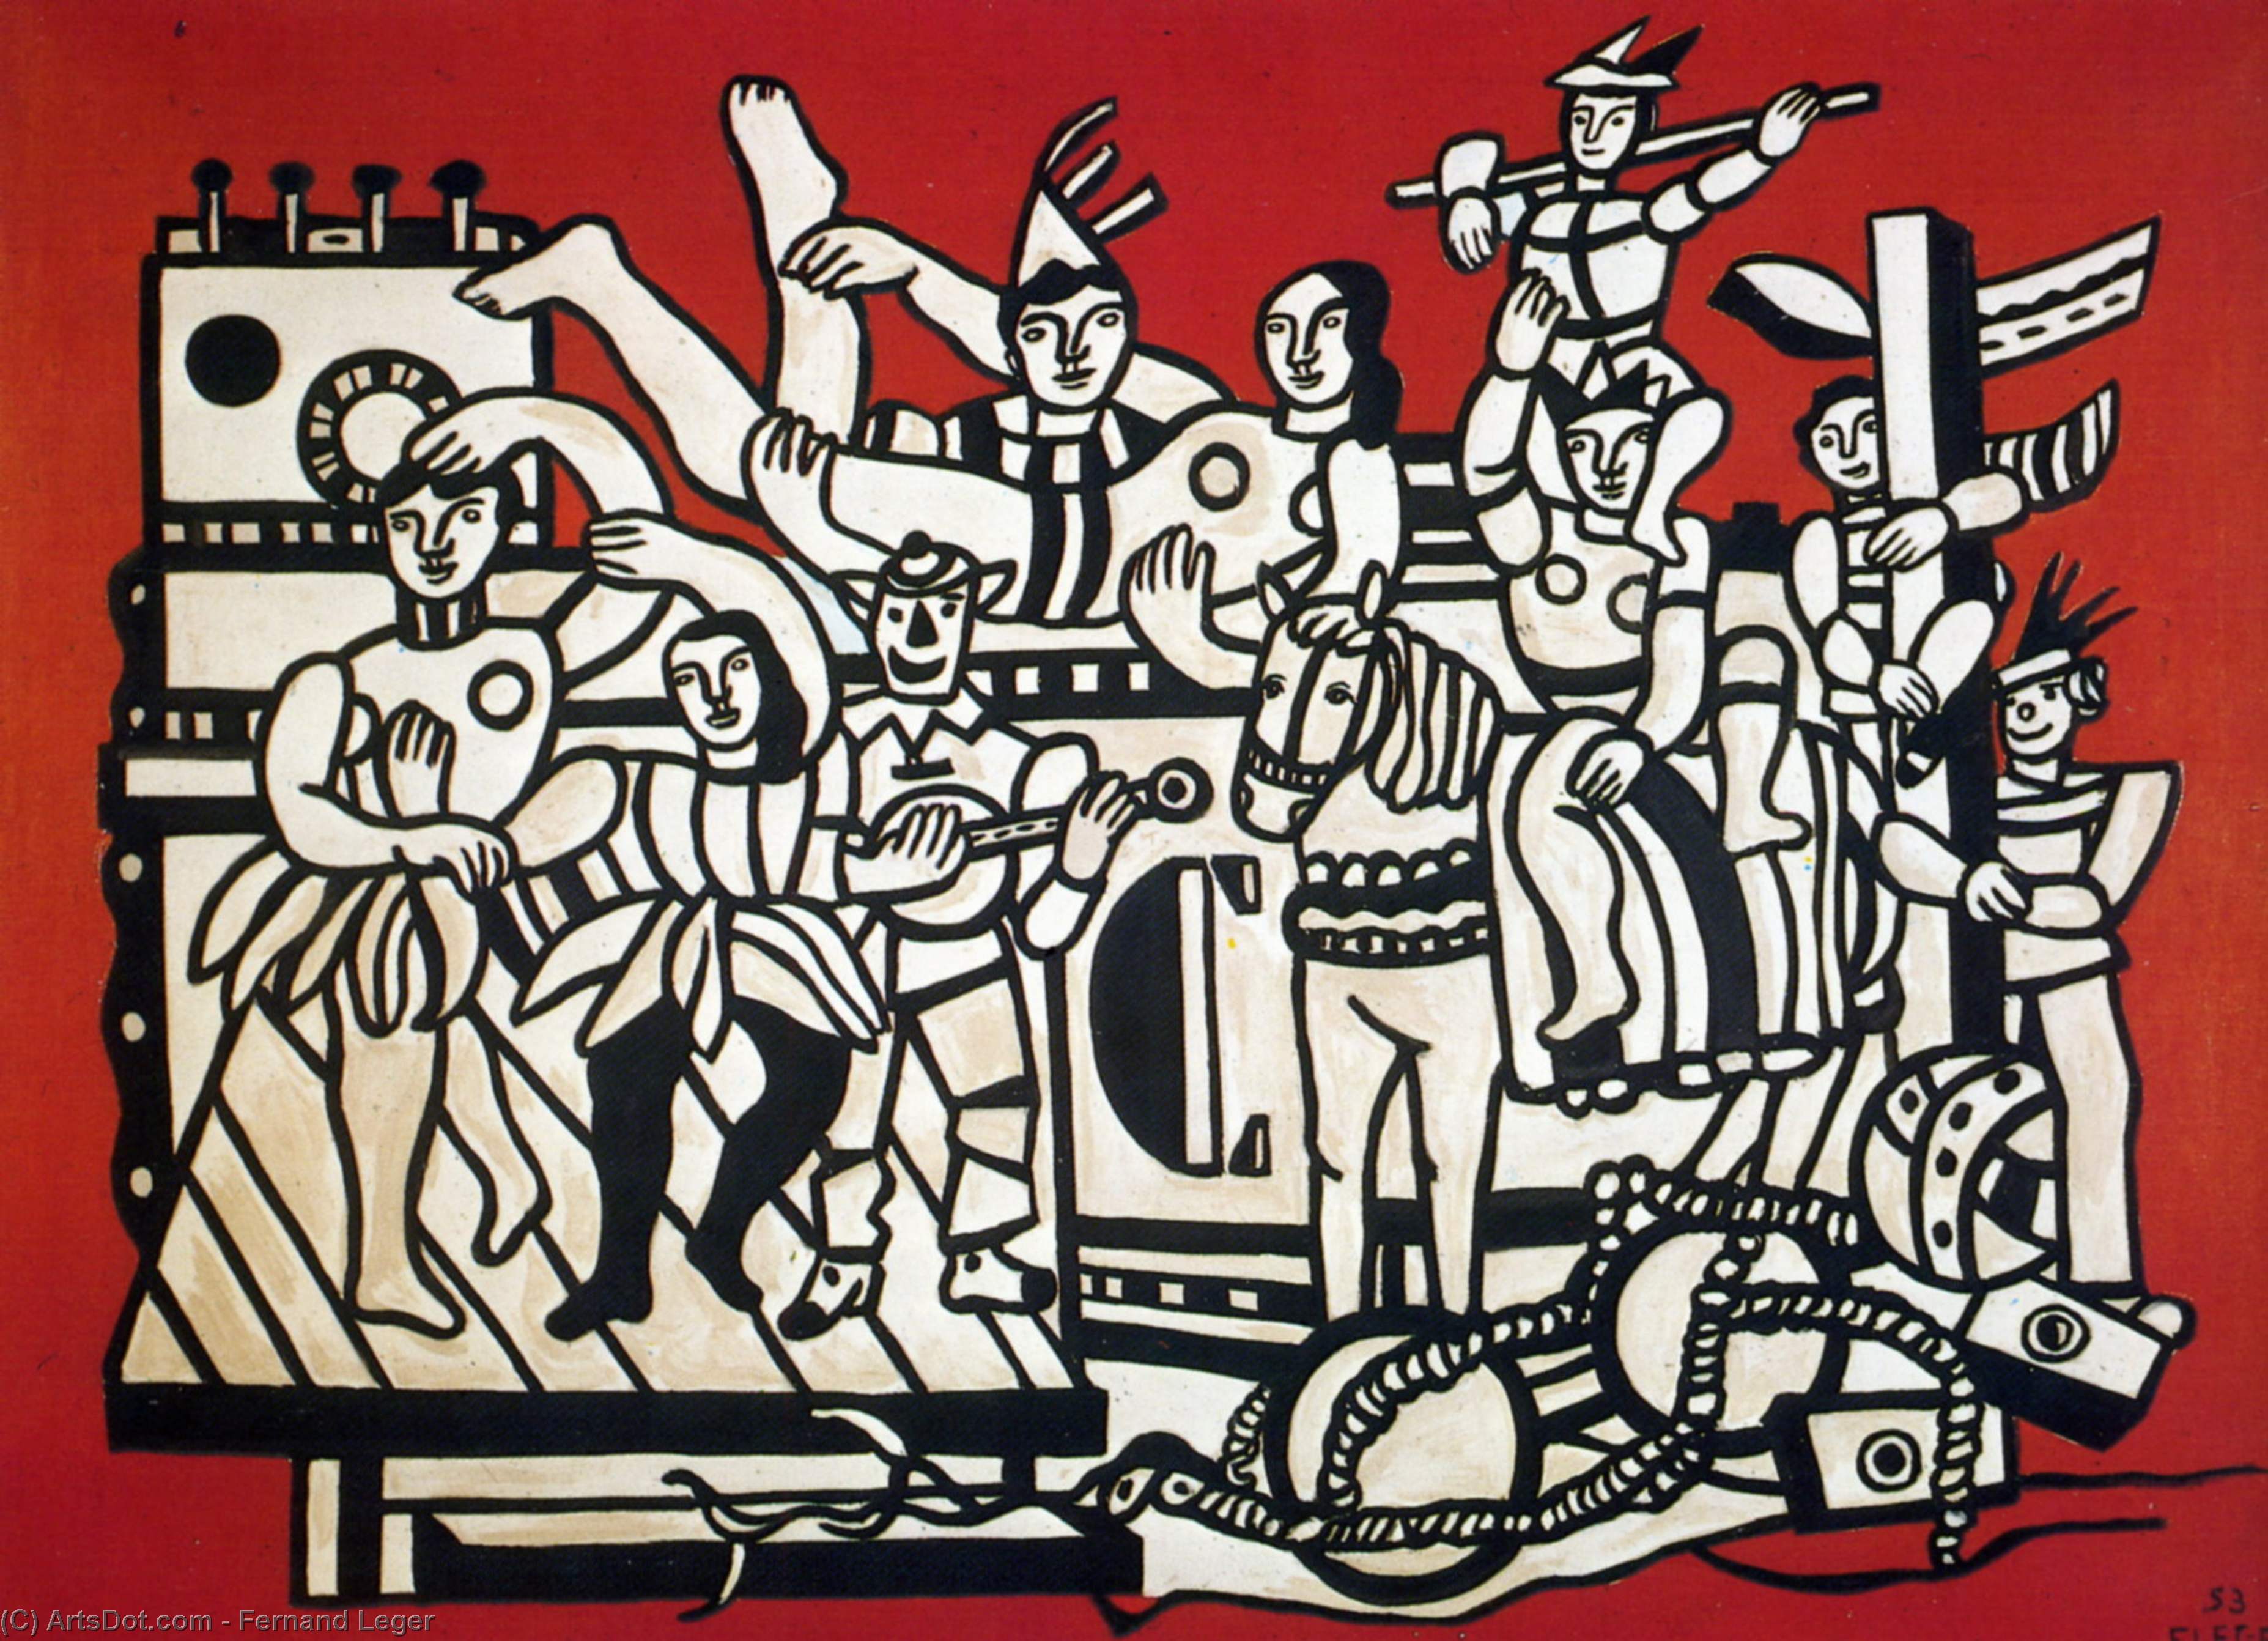 Wikioo.org - สารานุกรมวิจิตรศิลป์ - จิตรกรรม Fernand Leger - The large one parades on red bottom